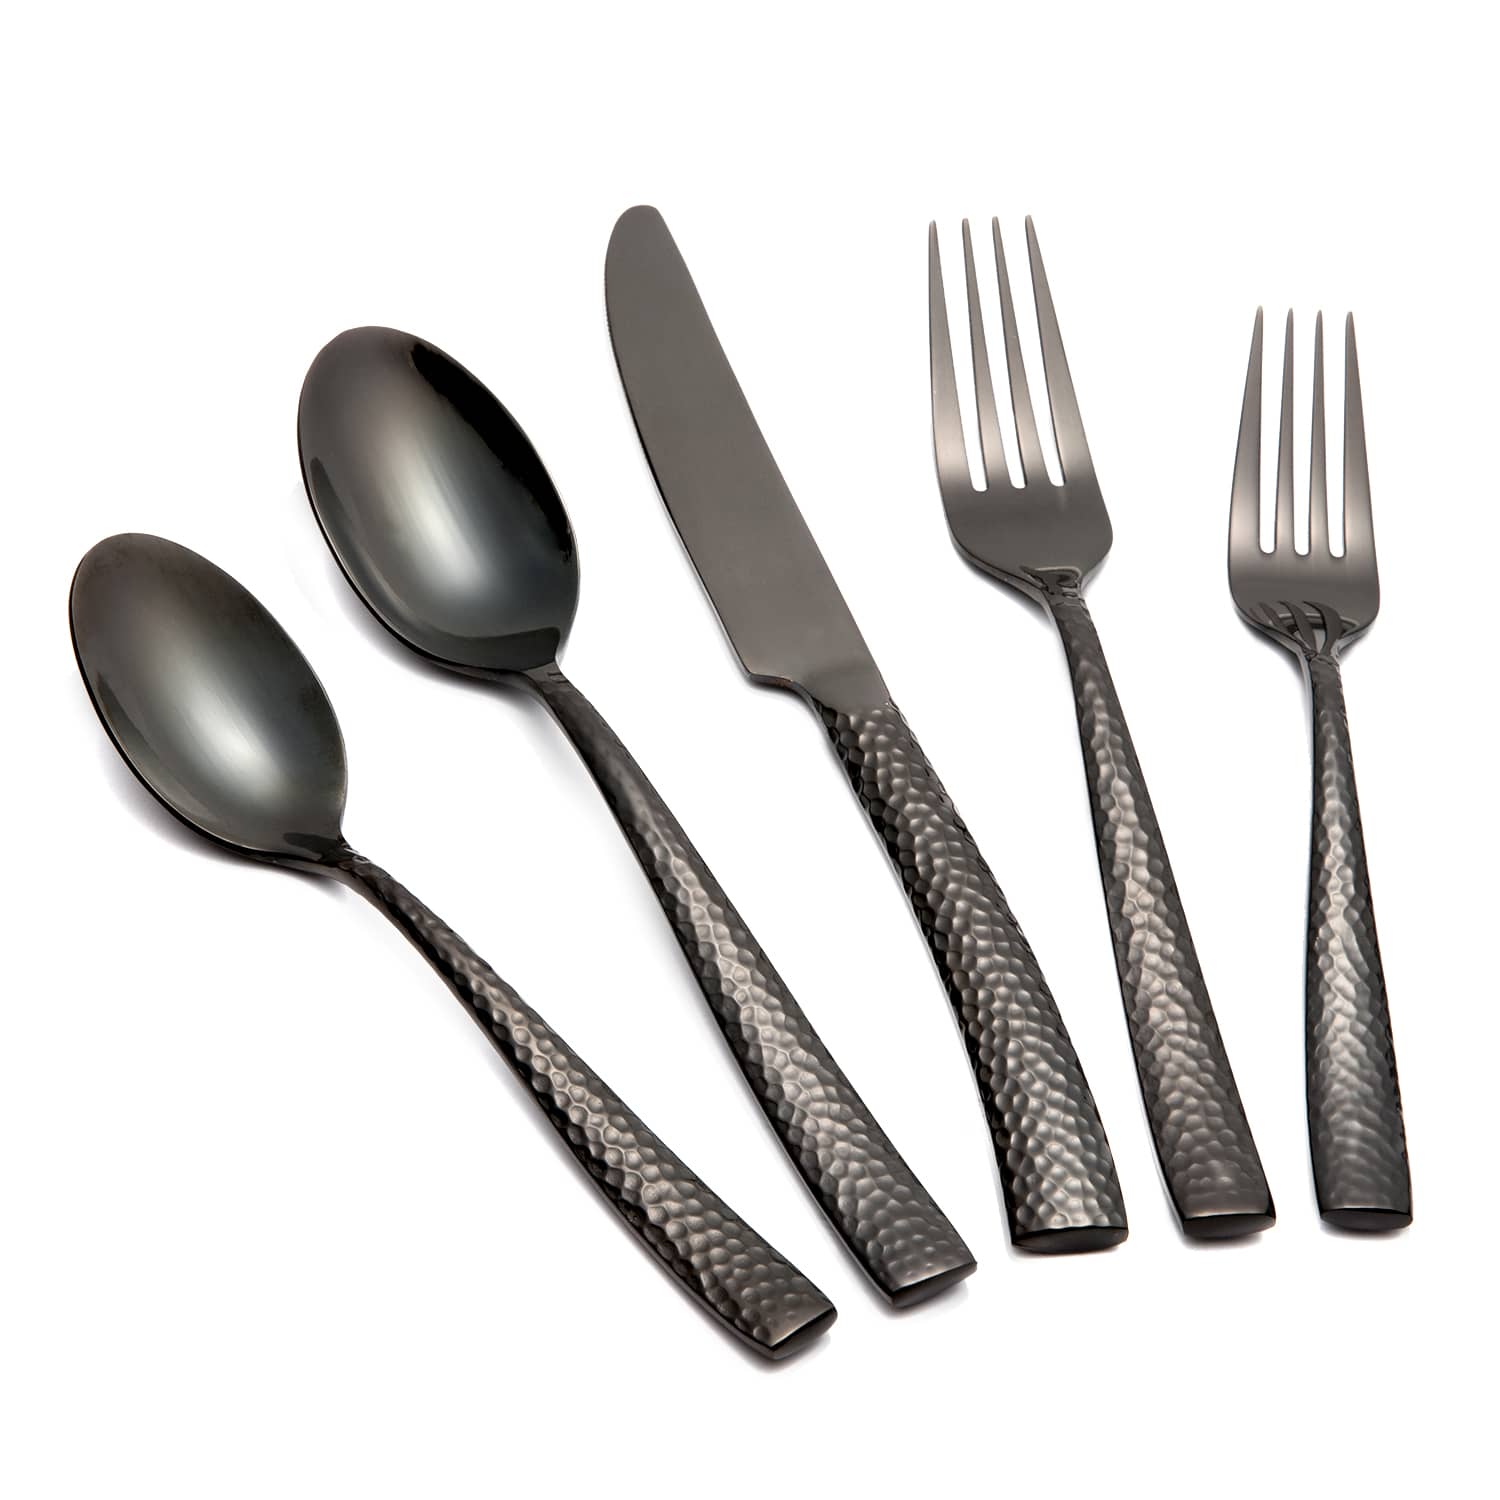 Black Hammered Stainless Steel Flatware Set for Wedding Party Home Featured Image